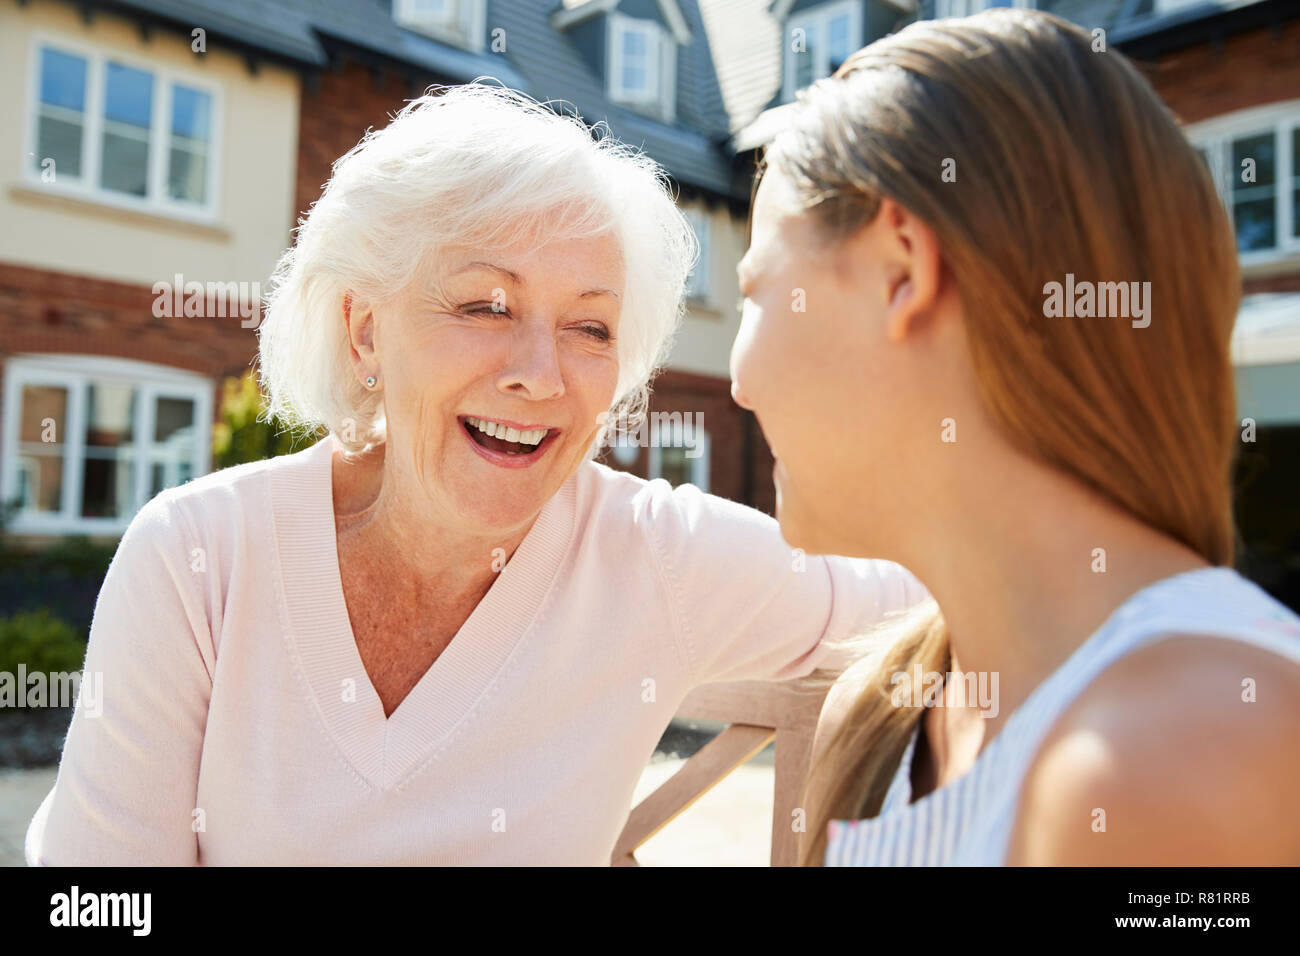 Granddaughter Sitting On Bench With Grandmother During Visit To Retirement Home Stock Photo